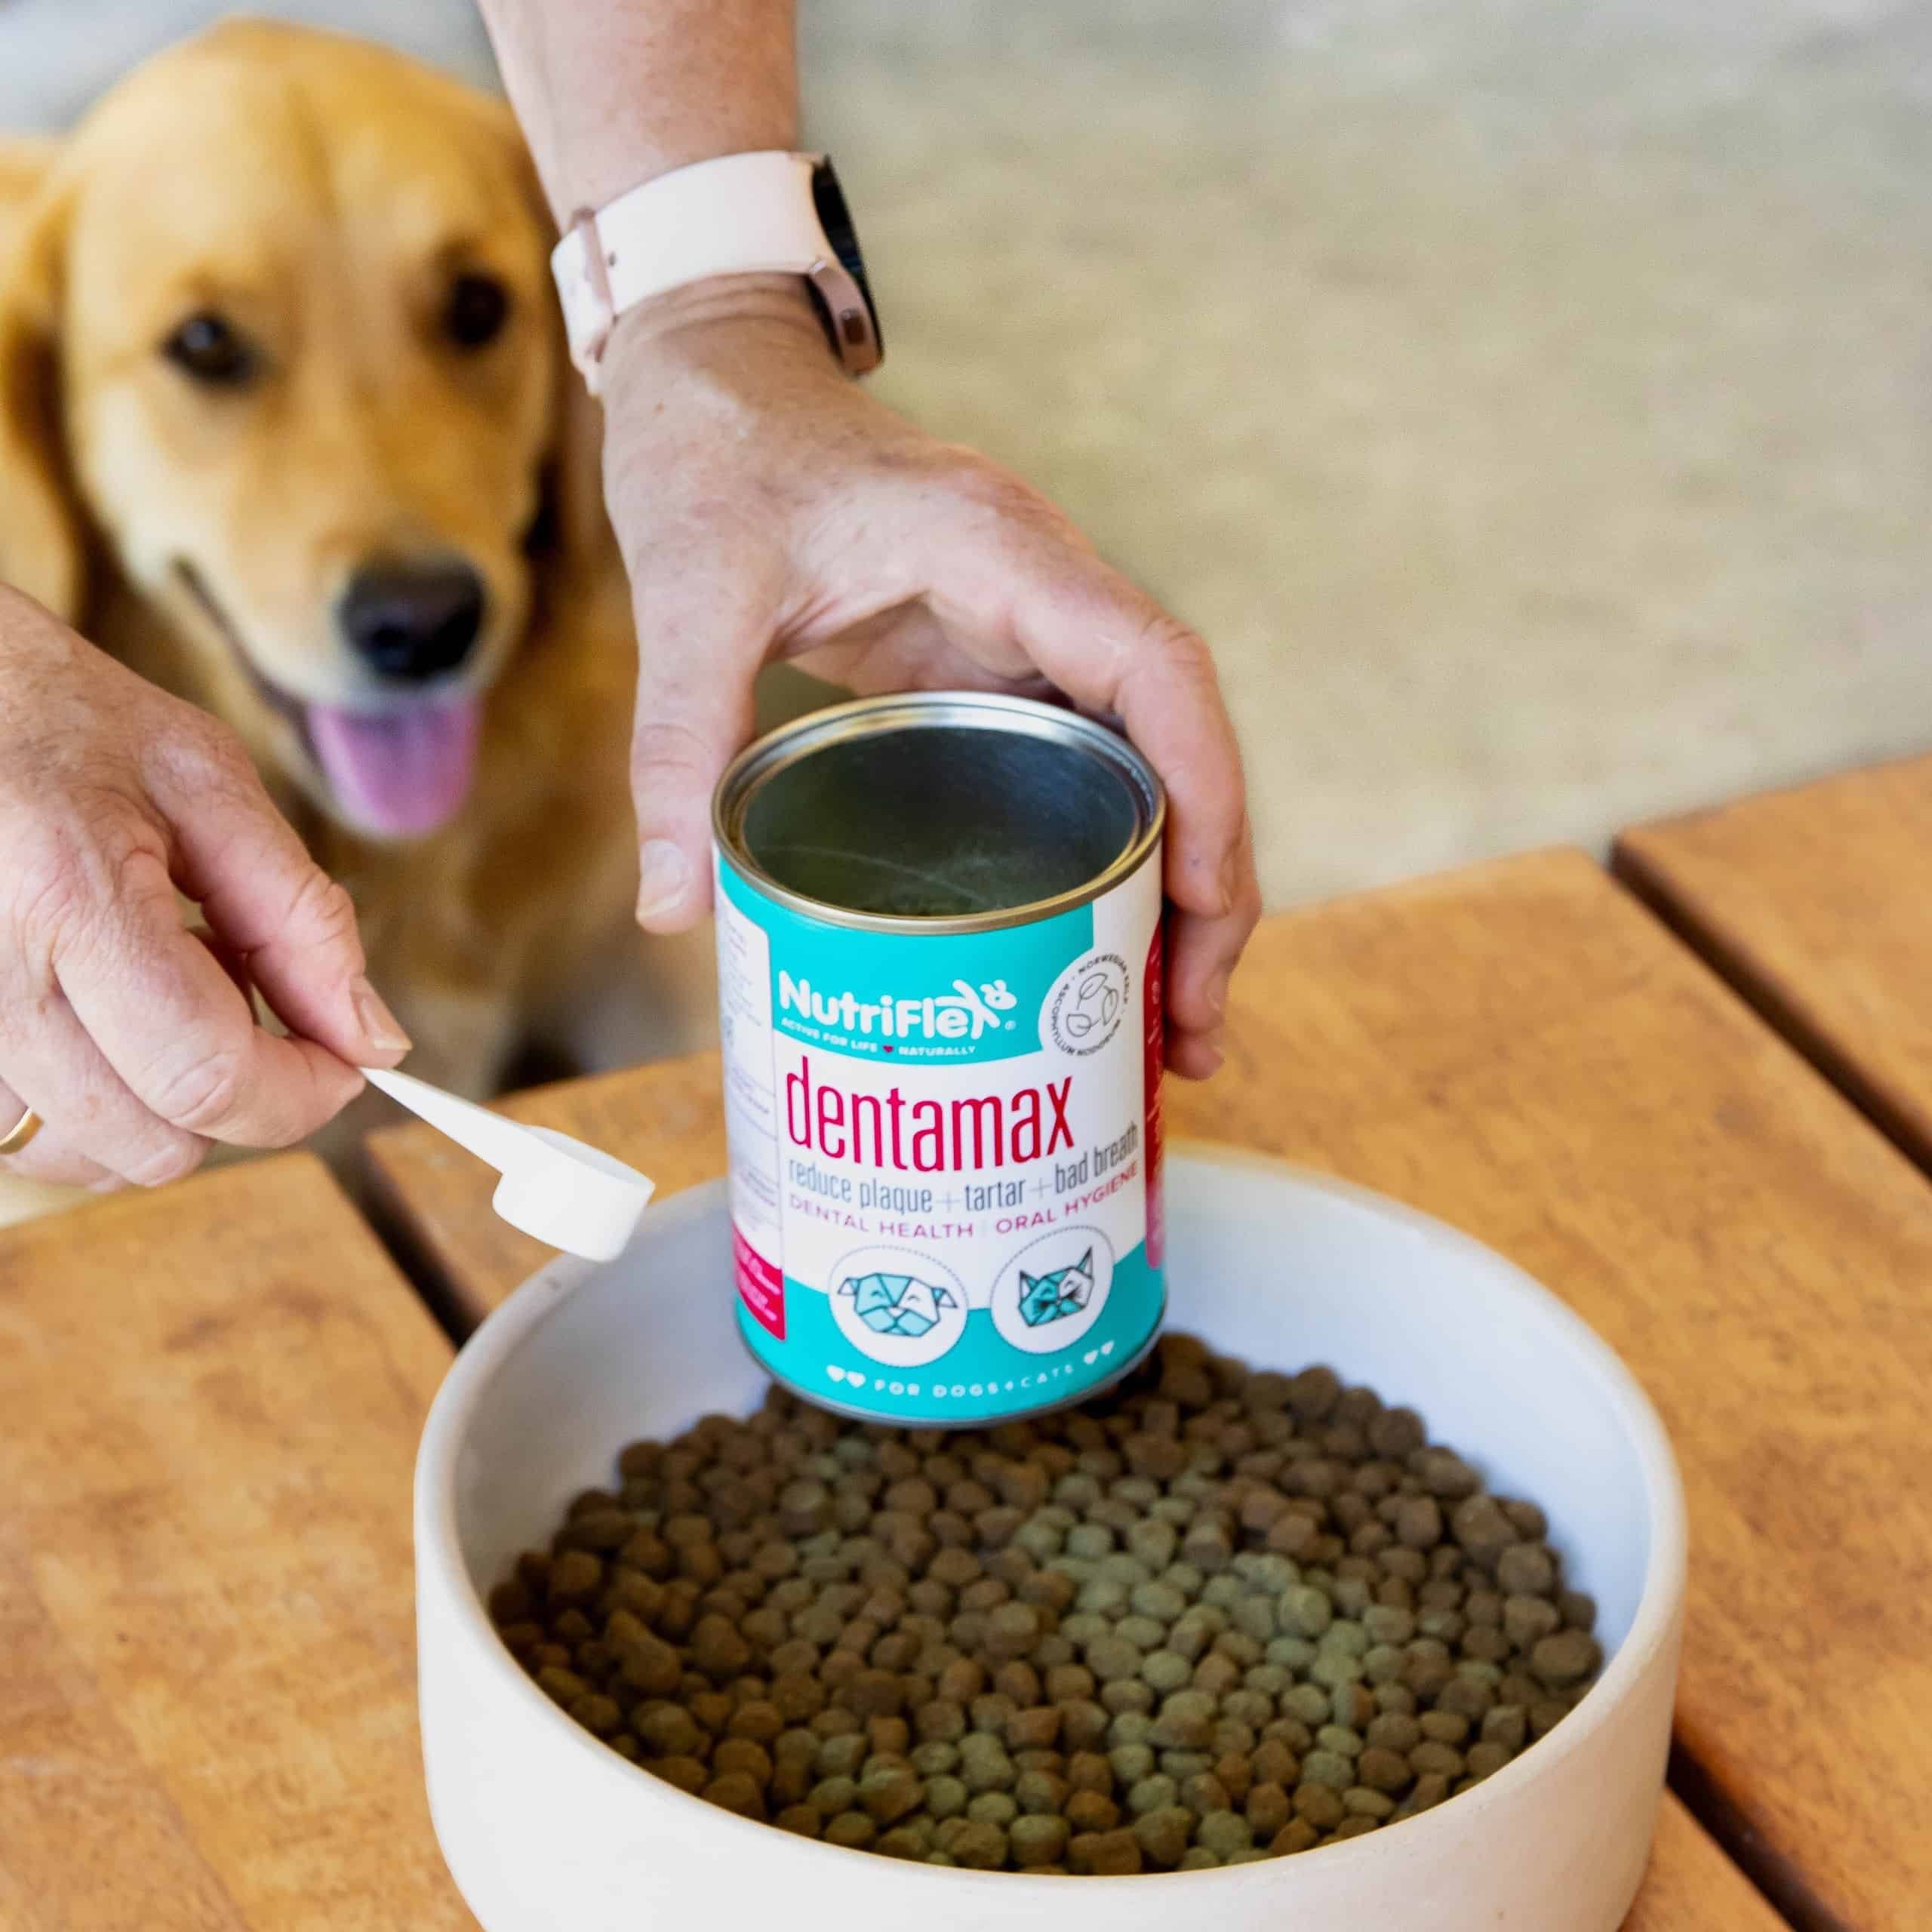 Sprinkle the recommended amount of DentaMax powder over your pets food once daily